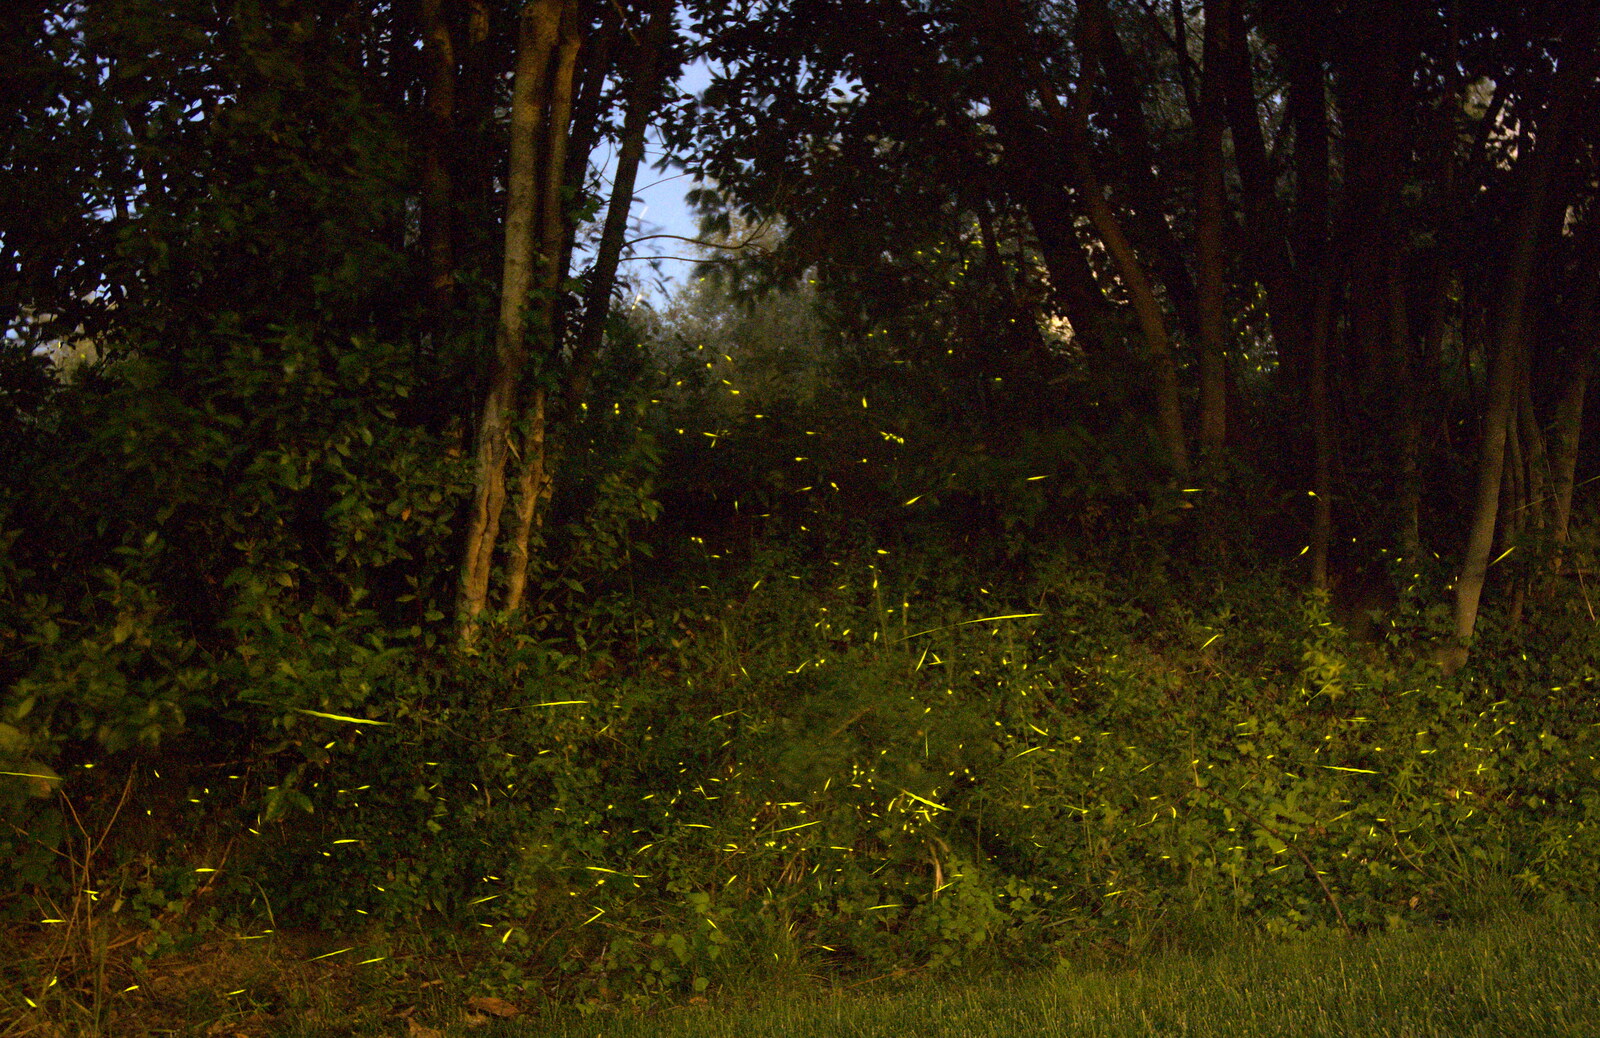 Each green dot or streak is a firefly from La Verna Monastery and the Fireflies of Tuscany, Italy - 14th June 2013